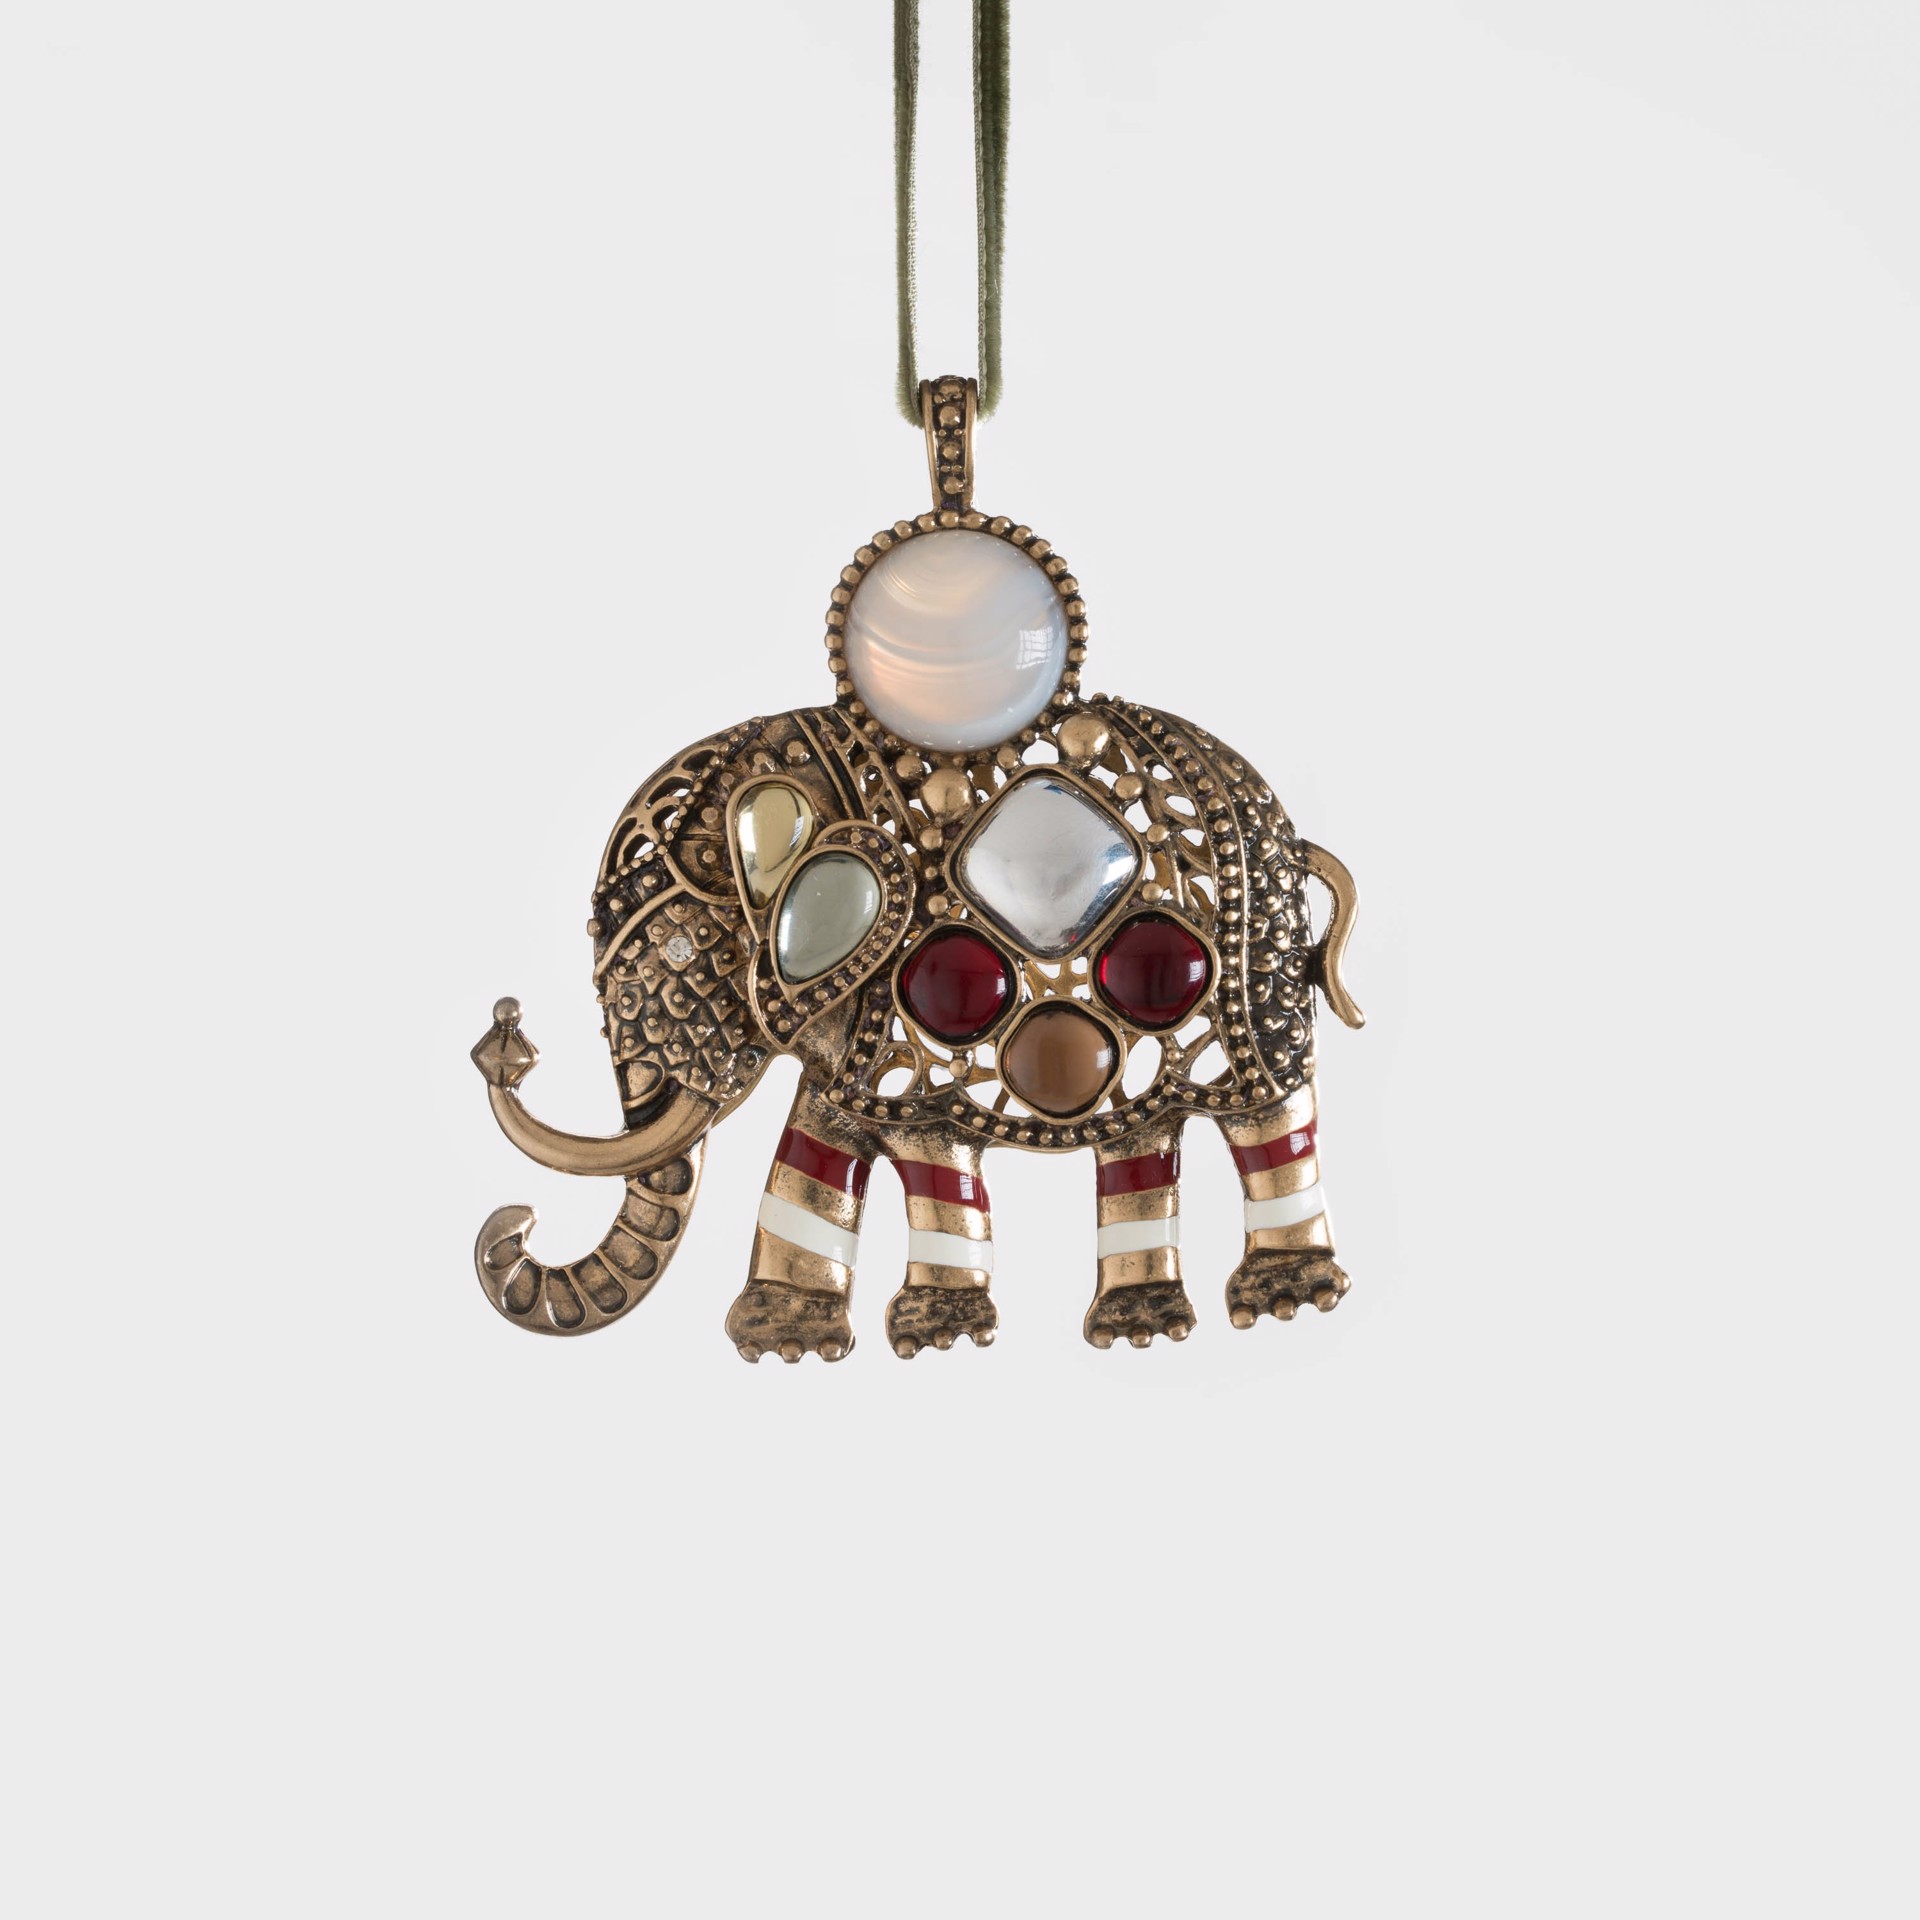 Jeweled Elephant Hanging Ornament by JB Ornaments & Gifts